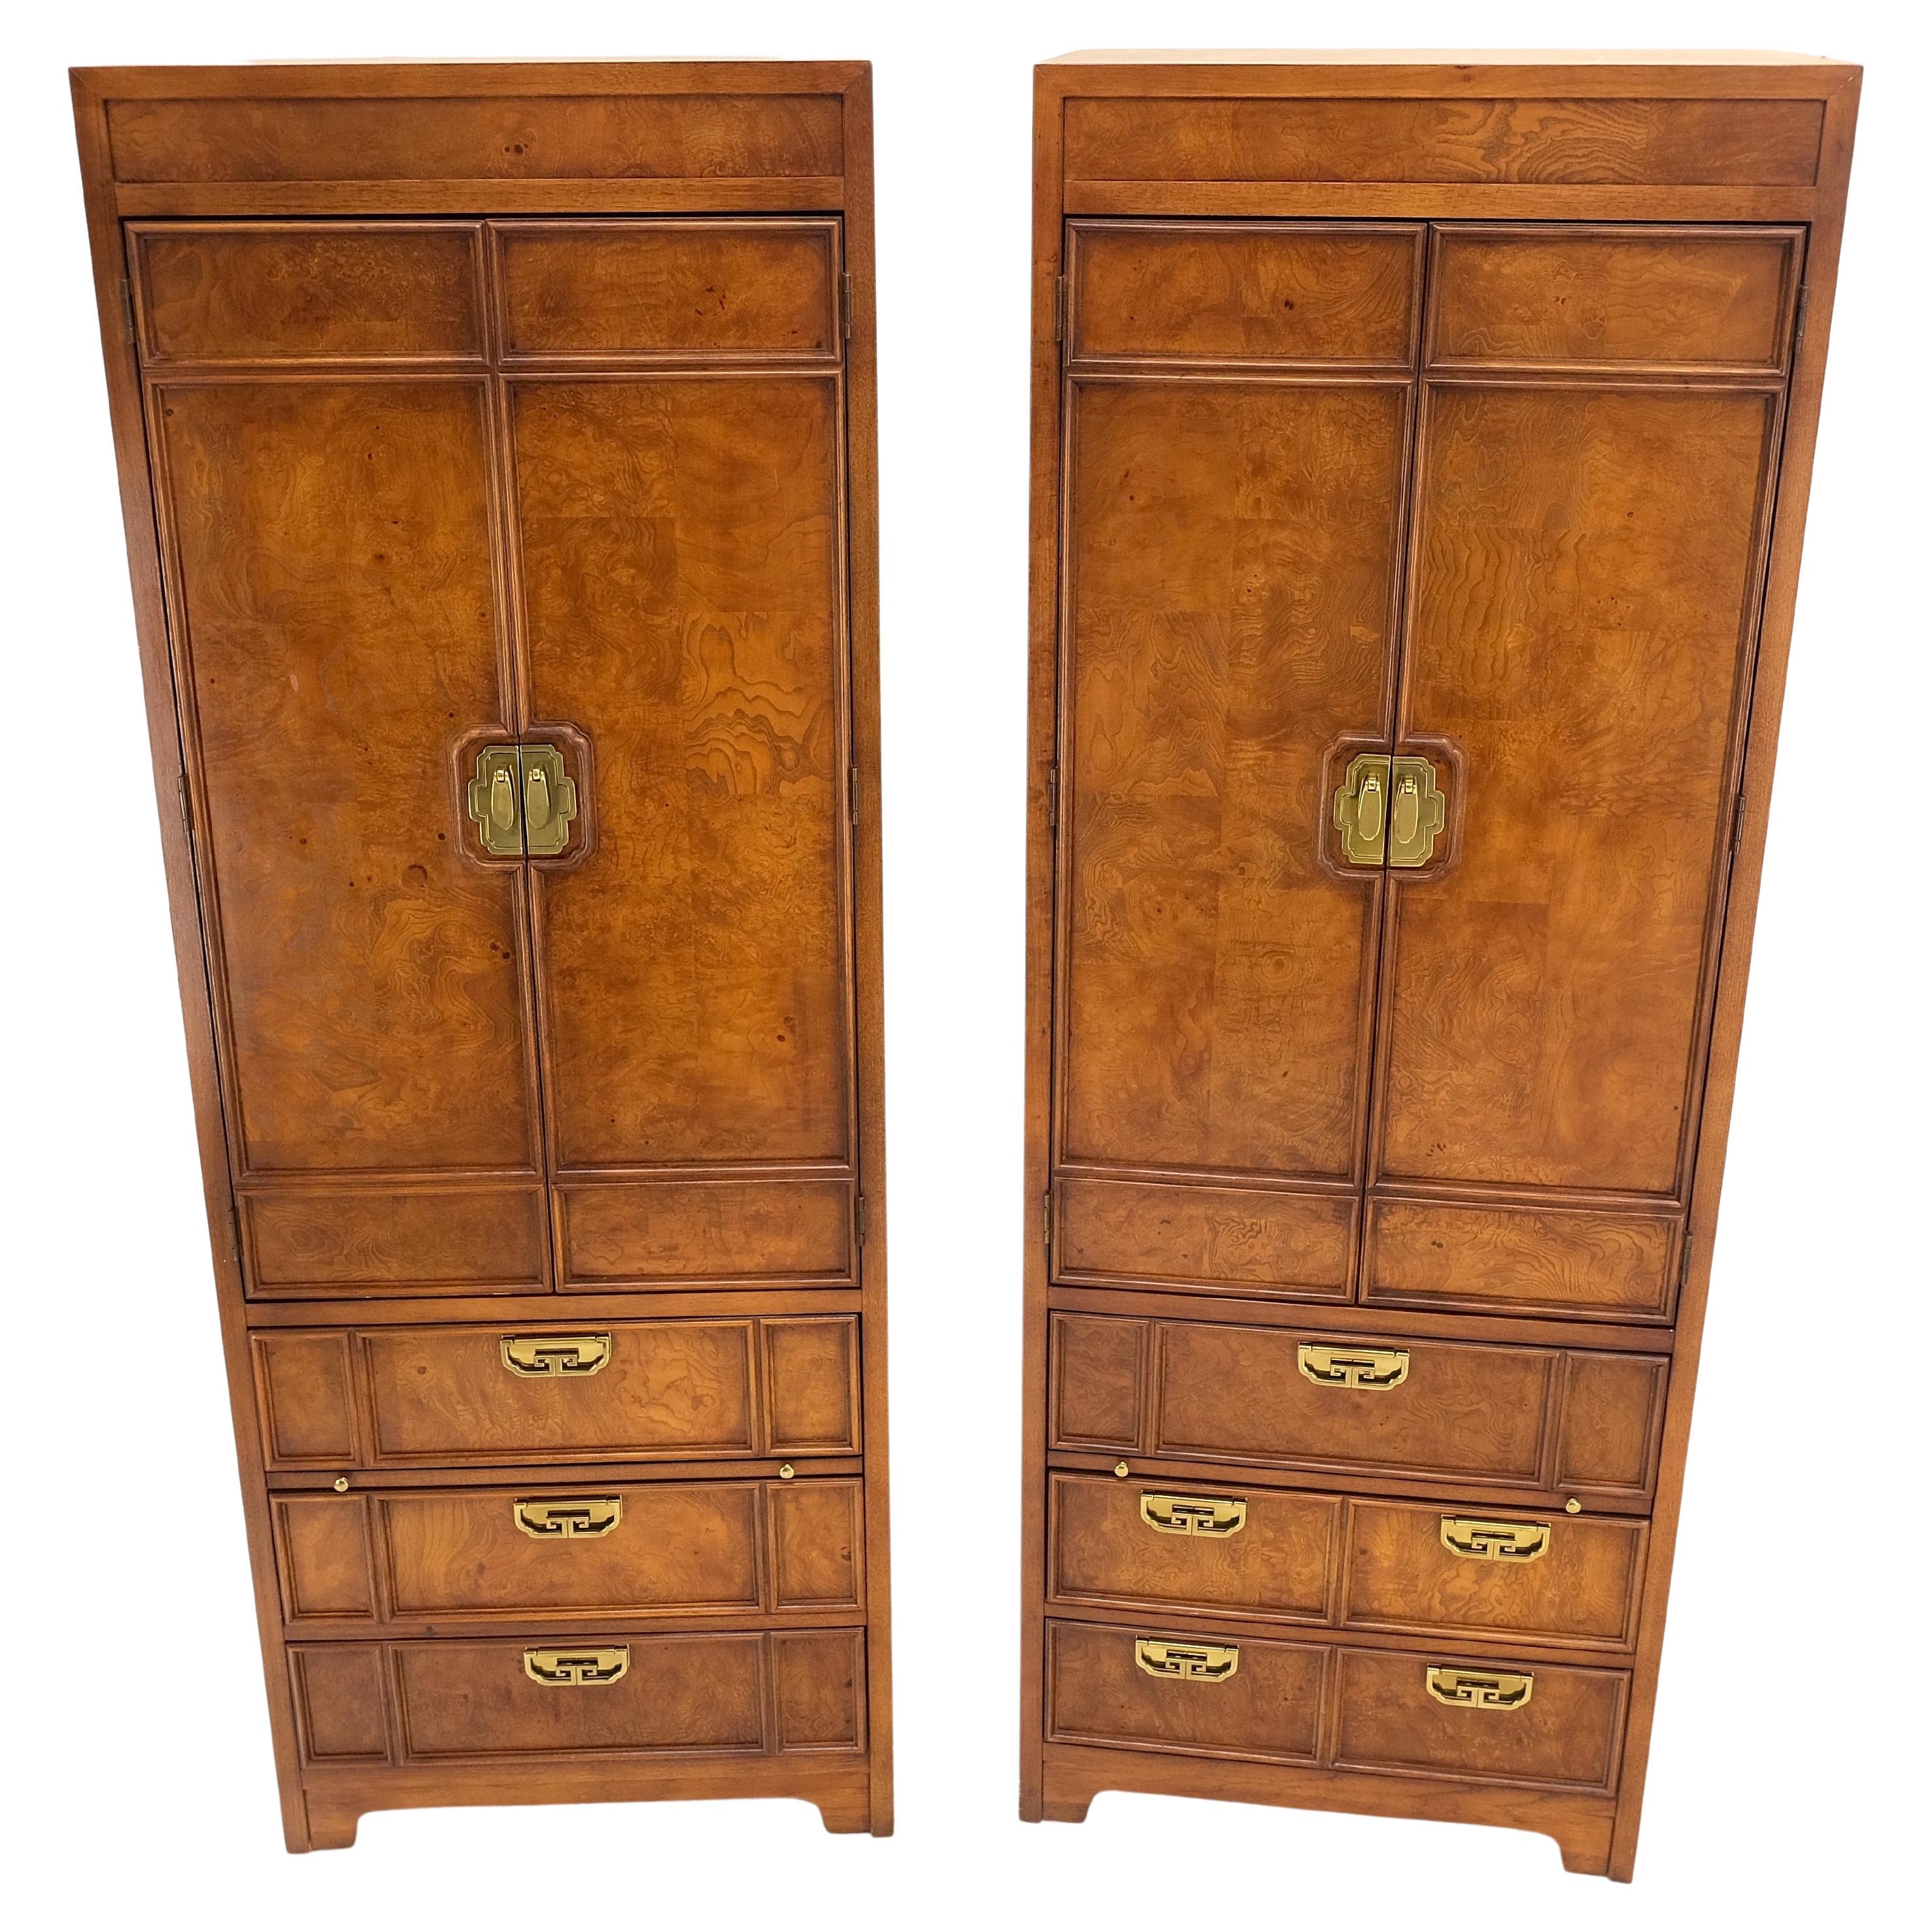 Thomasville Tall Tower Shape Highboy Dressers W/ Drawer Compartment Burl Wood 